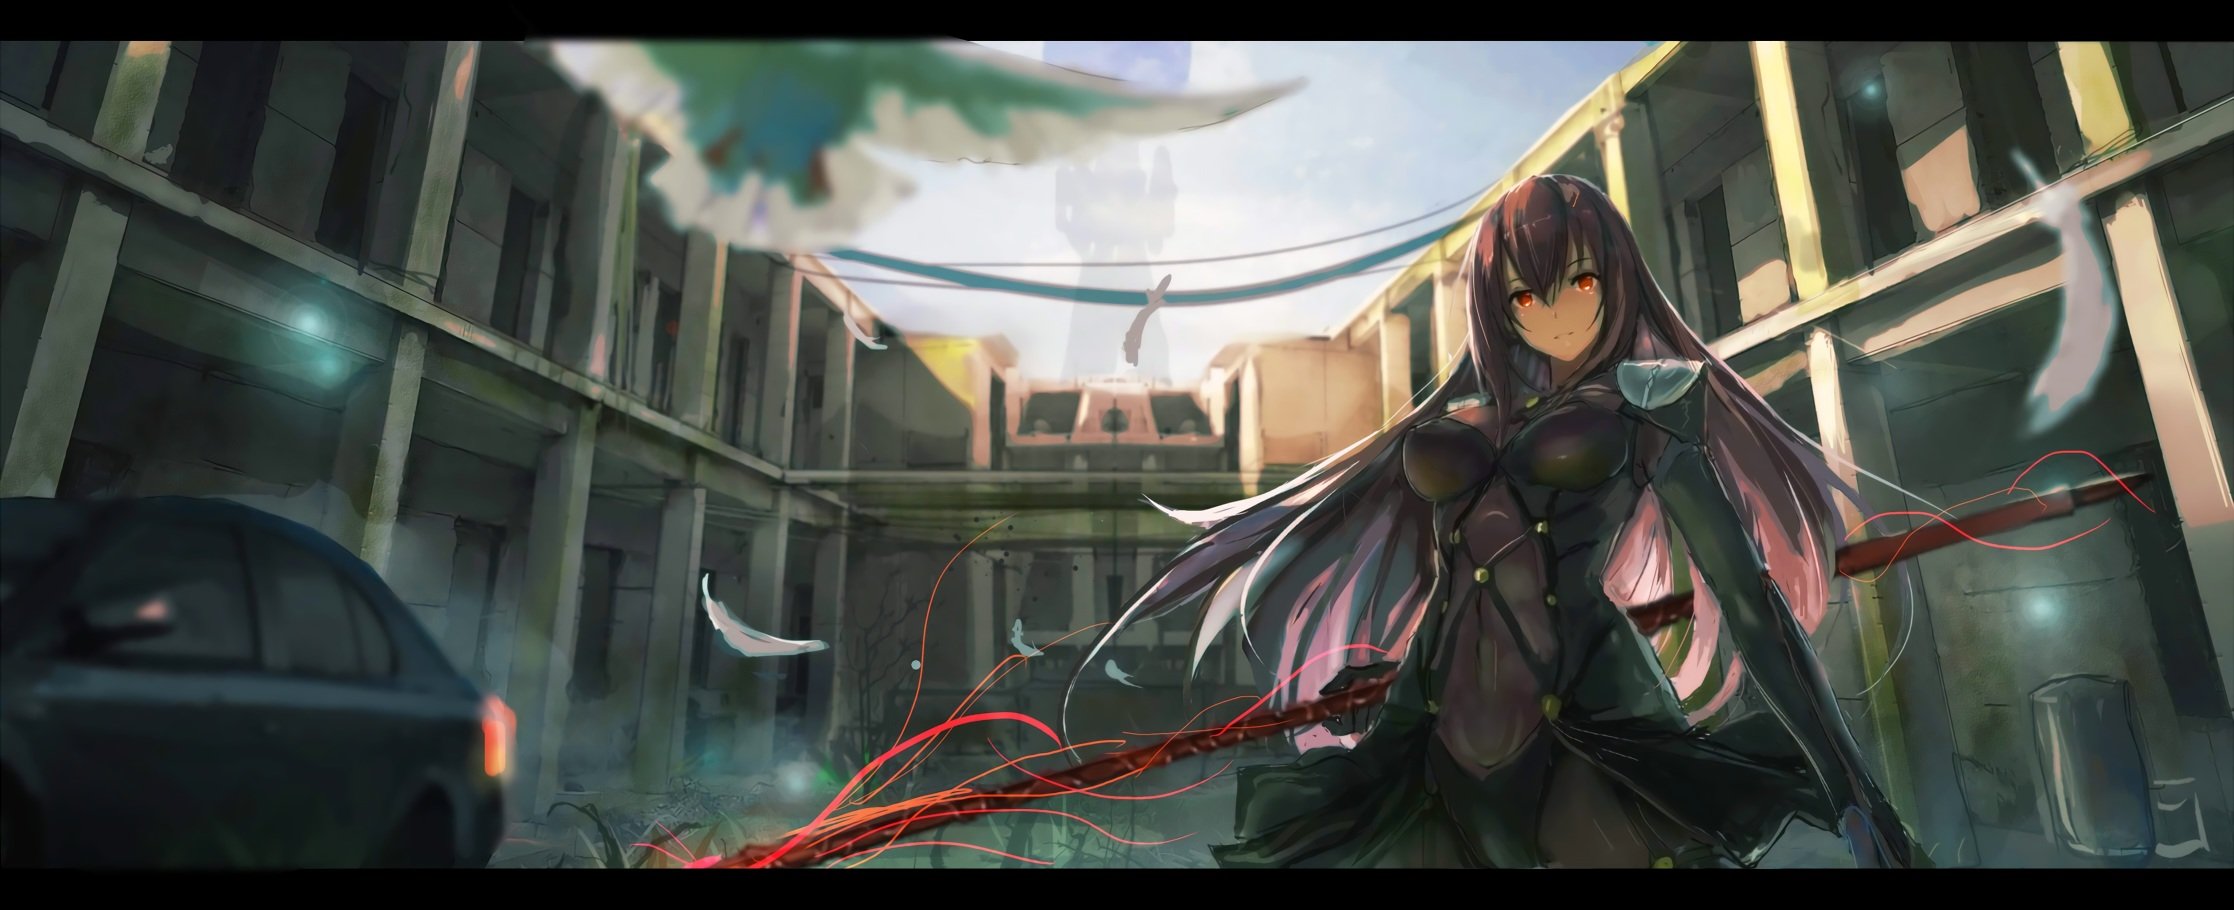 armor, Bodysuit, Building, Car, Fate, Grand, Order, Feathers, Lancer,  fate, Grand, Order , Long, Hair, Purple, Hair, Red, Eyes, Skintight, Spear, Weapon, Xkc Wallpaper